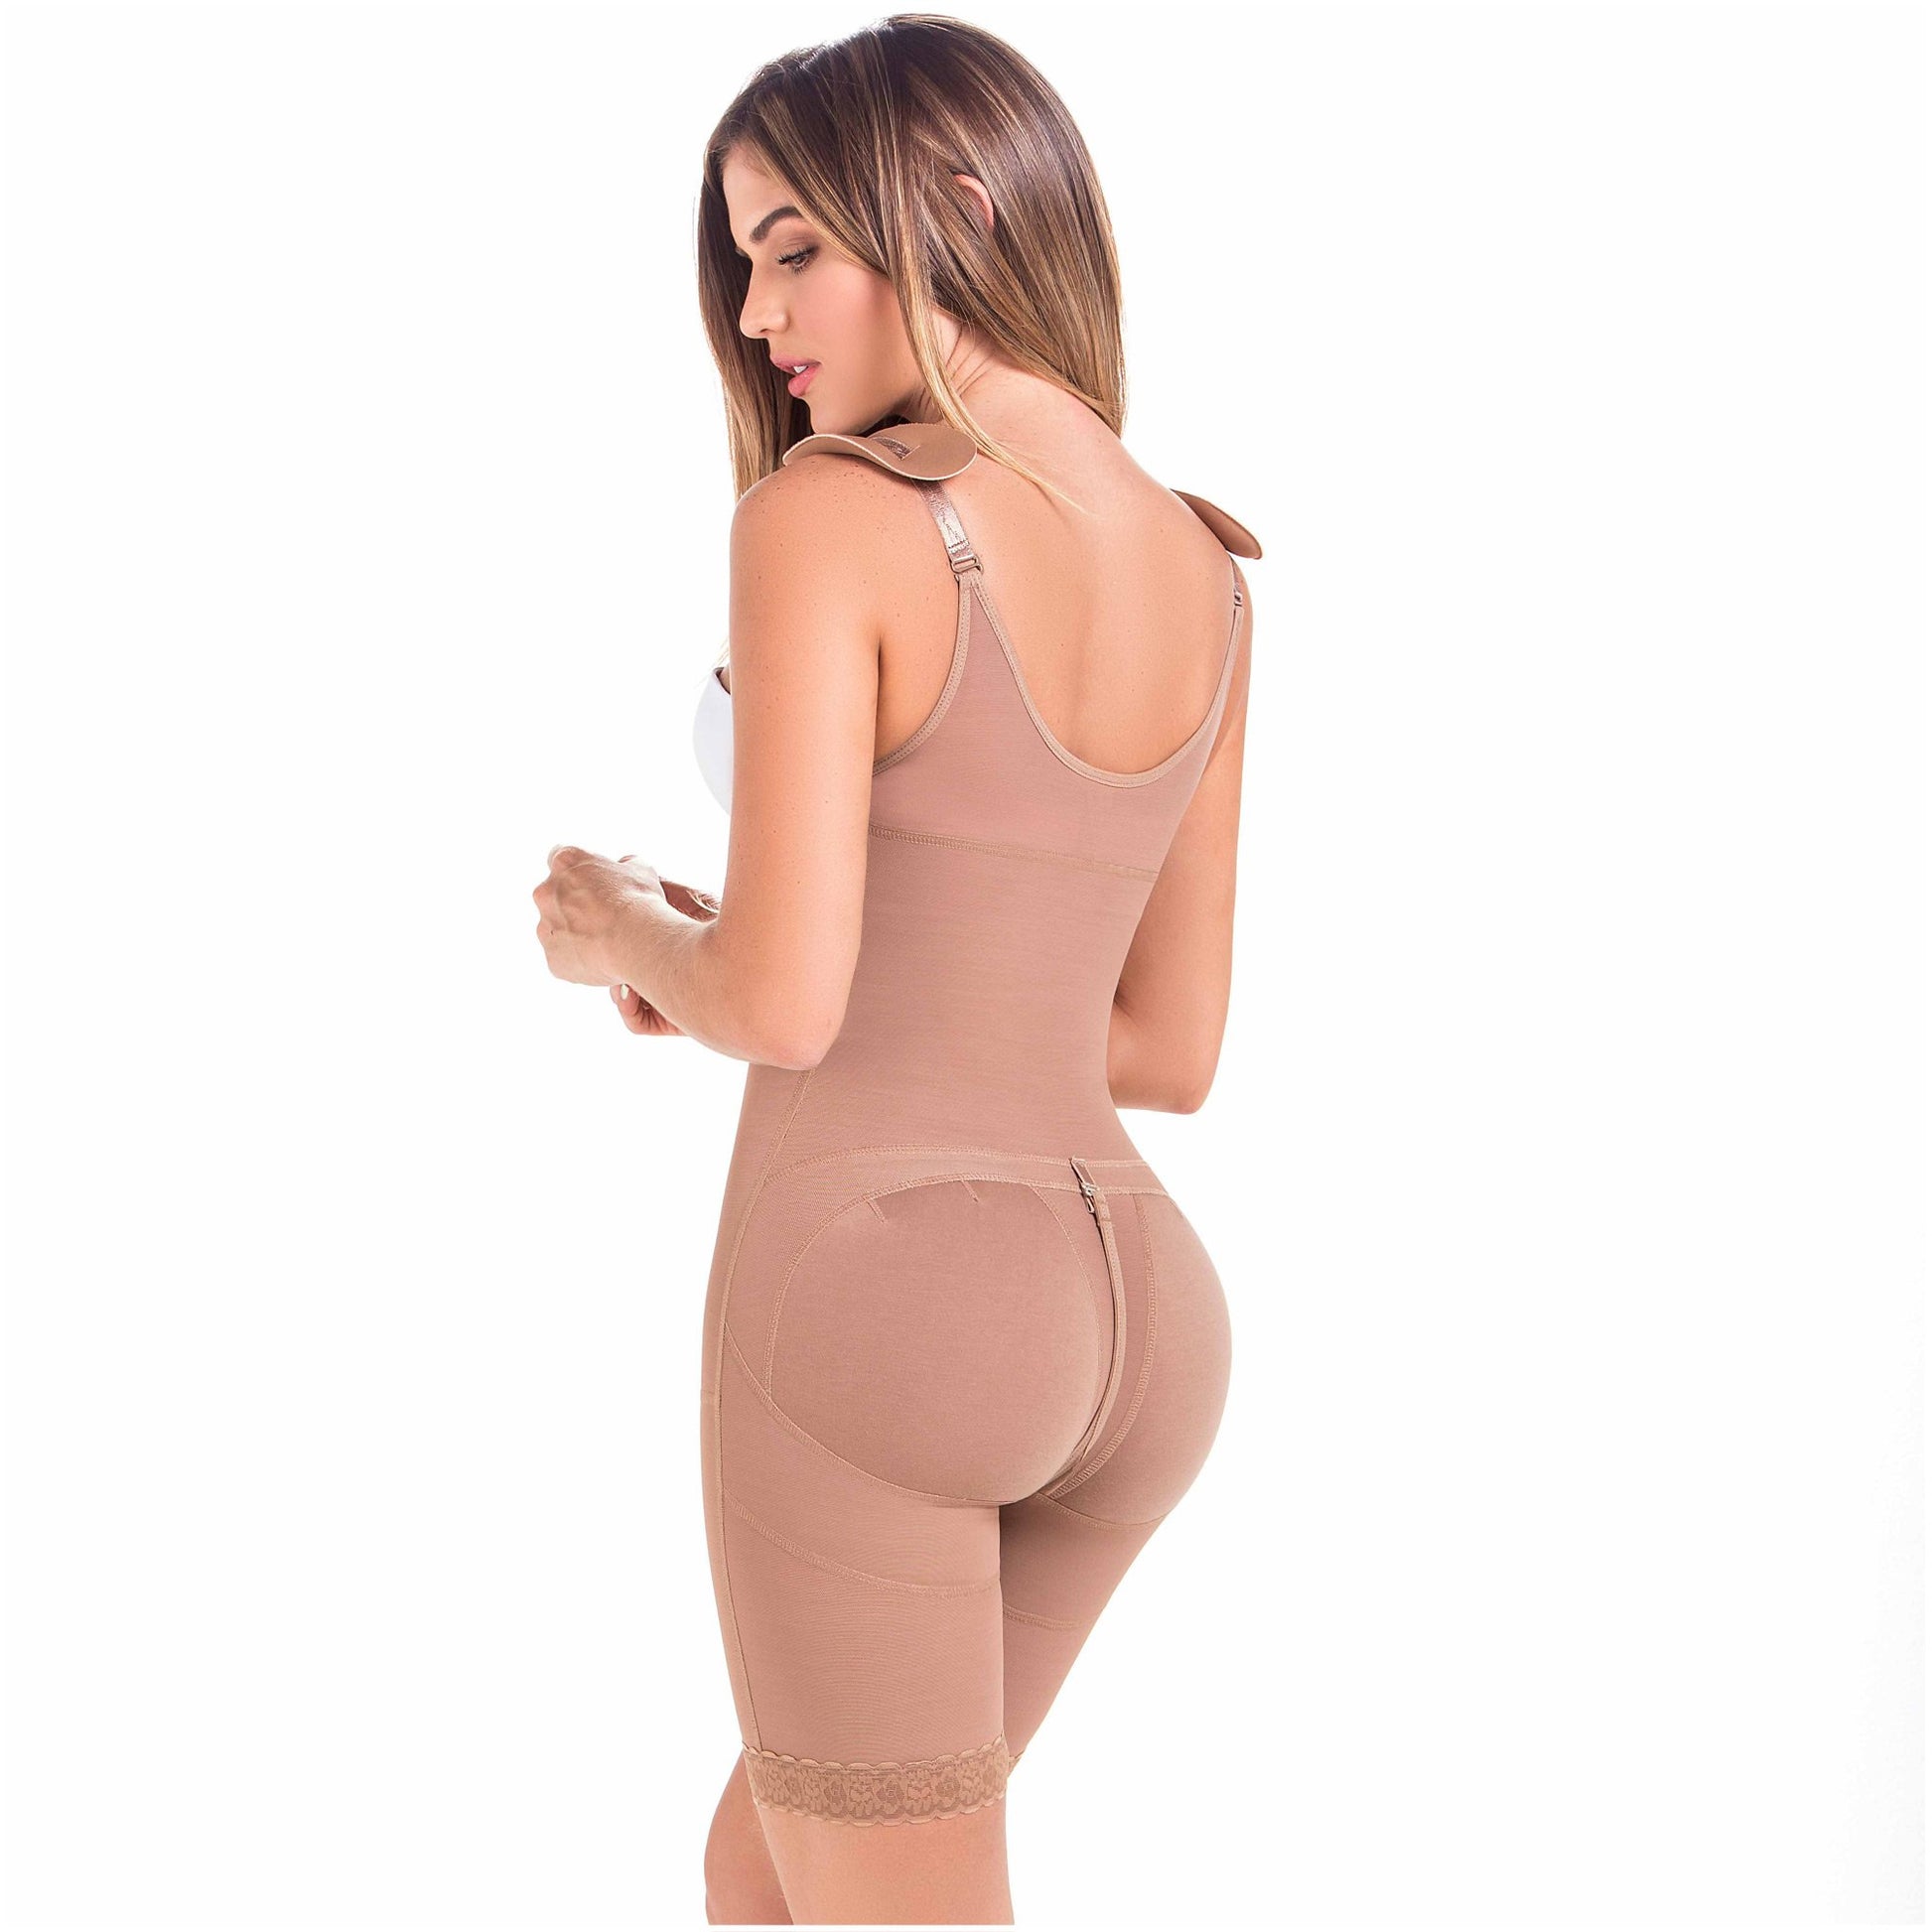 MariaE Fajas 9182T | Postpartum Shapewear Tummy Control Butt-lifting Effect | Butt Lifting Girdle for Daily Use - fajacolombian